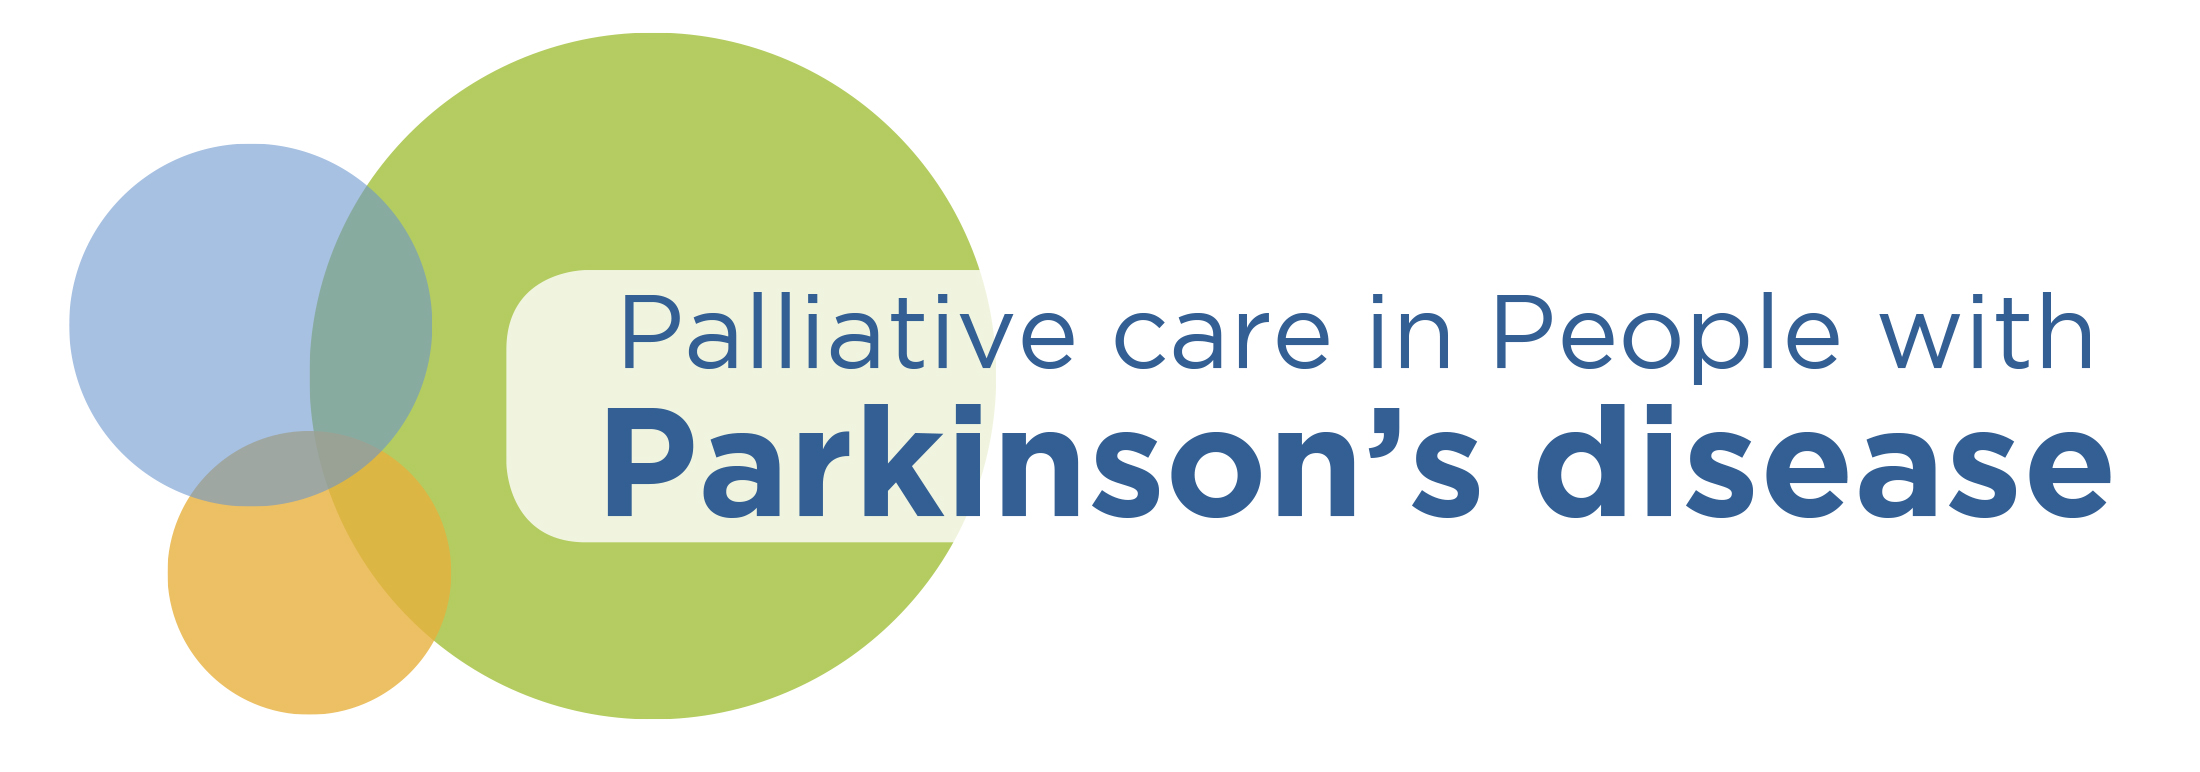 Launch of the Palliative Care Needs of Parkinson's Disease Guidelines